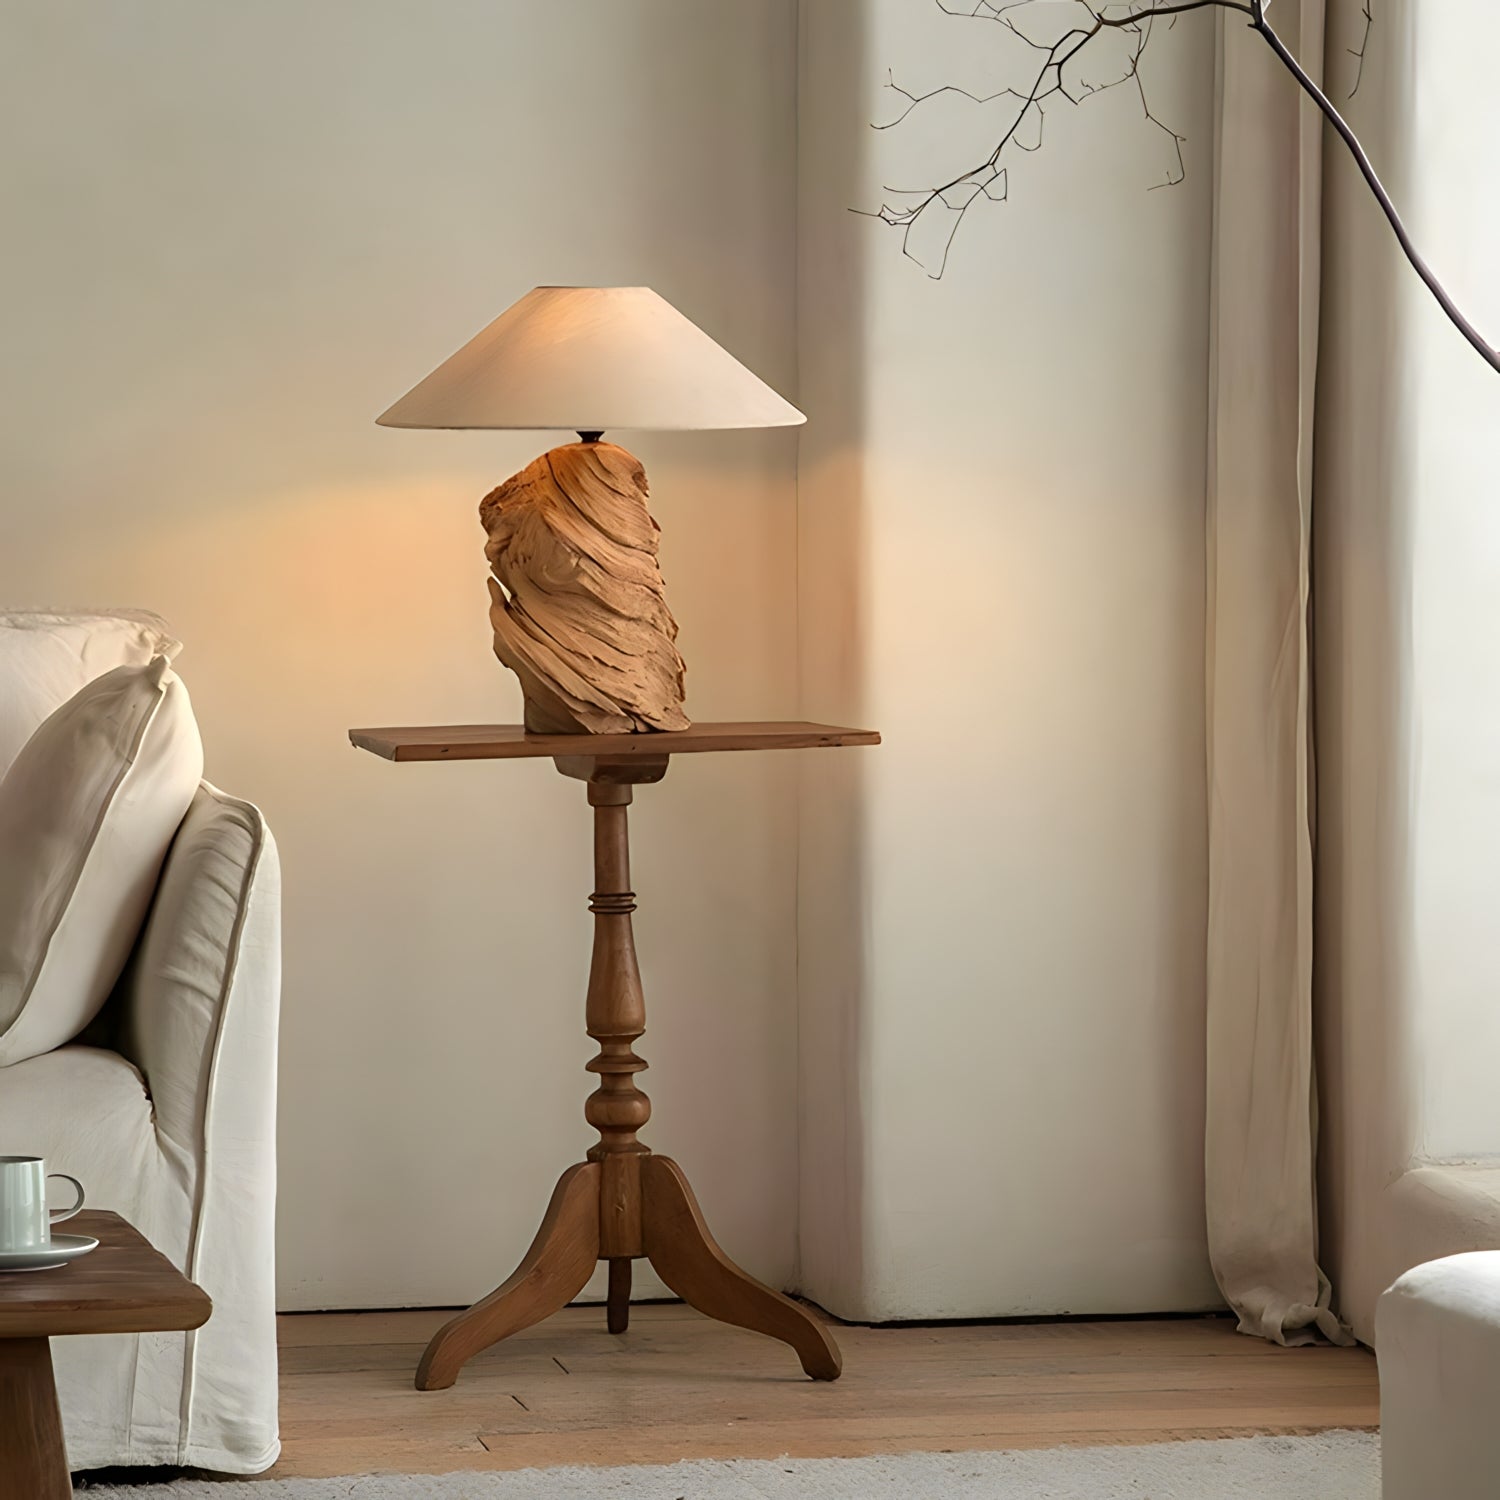 Custom-Crafted Wooden Lamp - Contact Us First